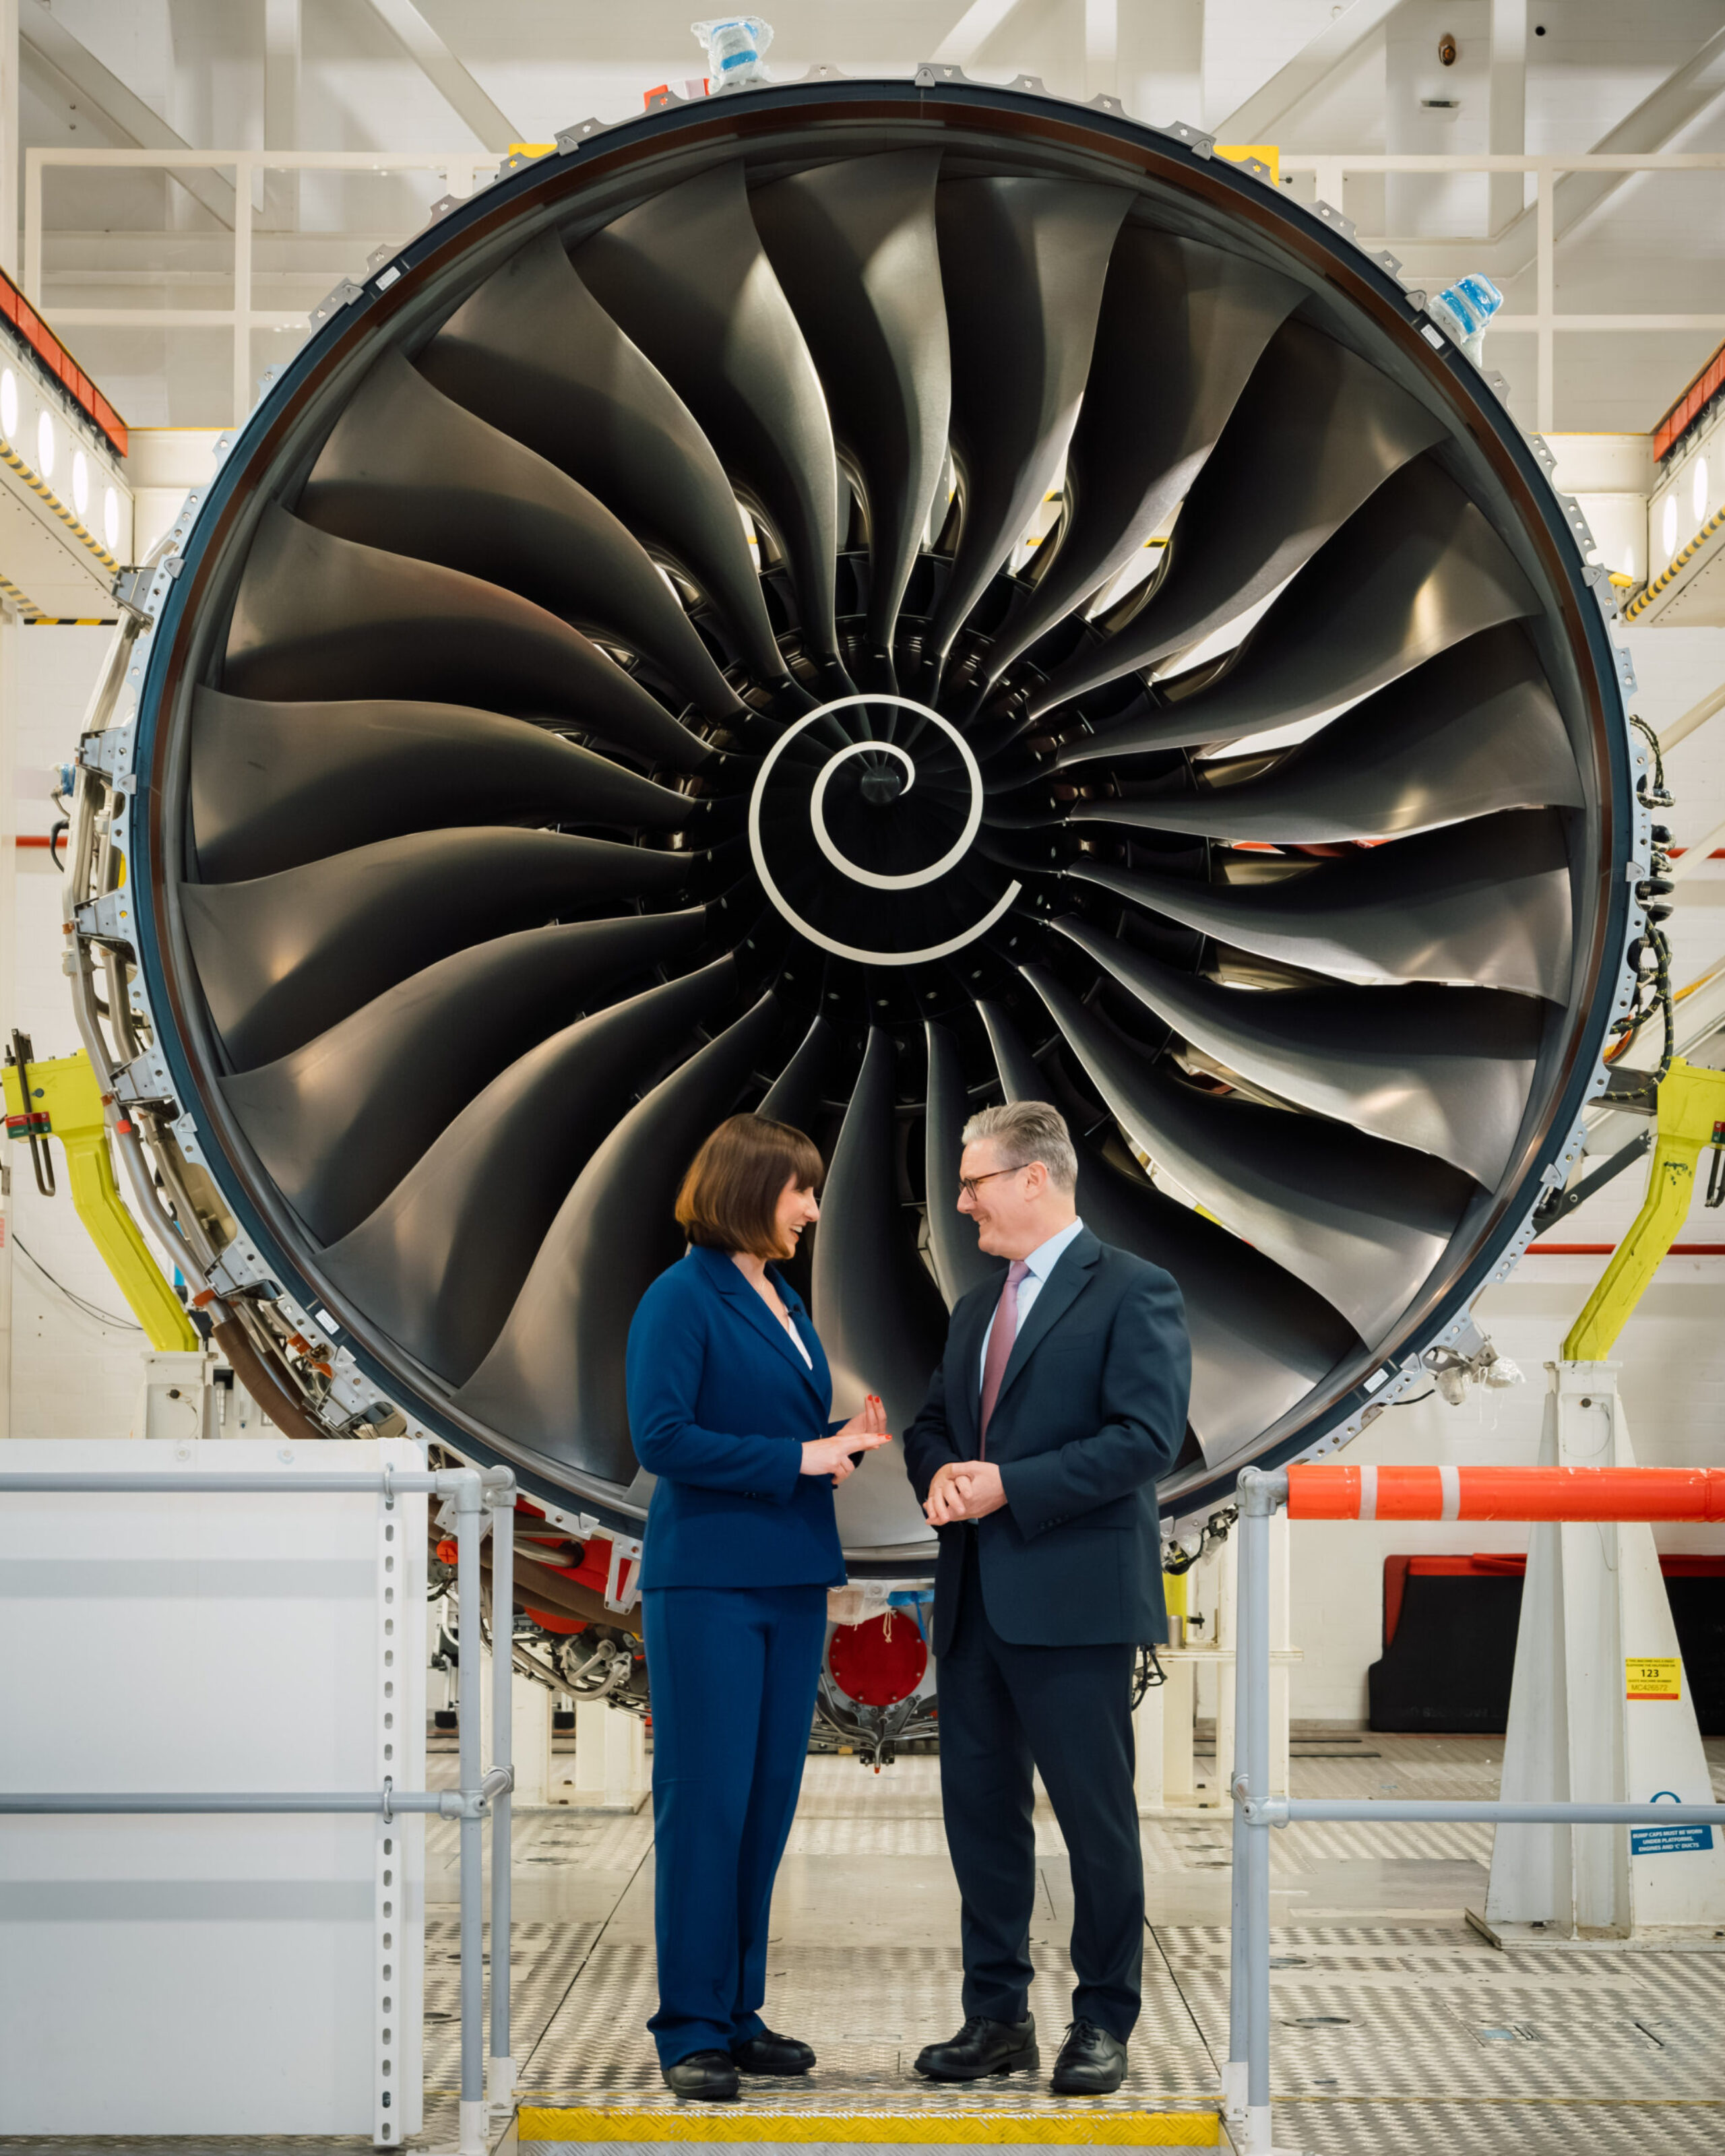 Keir Starmer and Rachel Reeves standing side by side talking in front of an engine turbine.